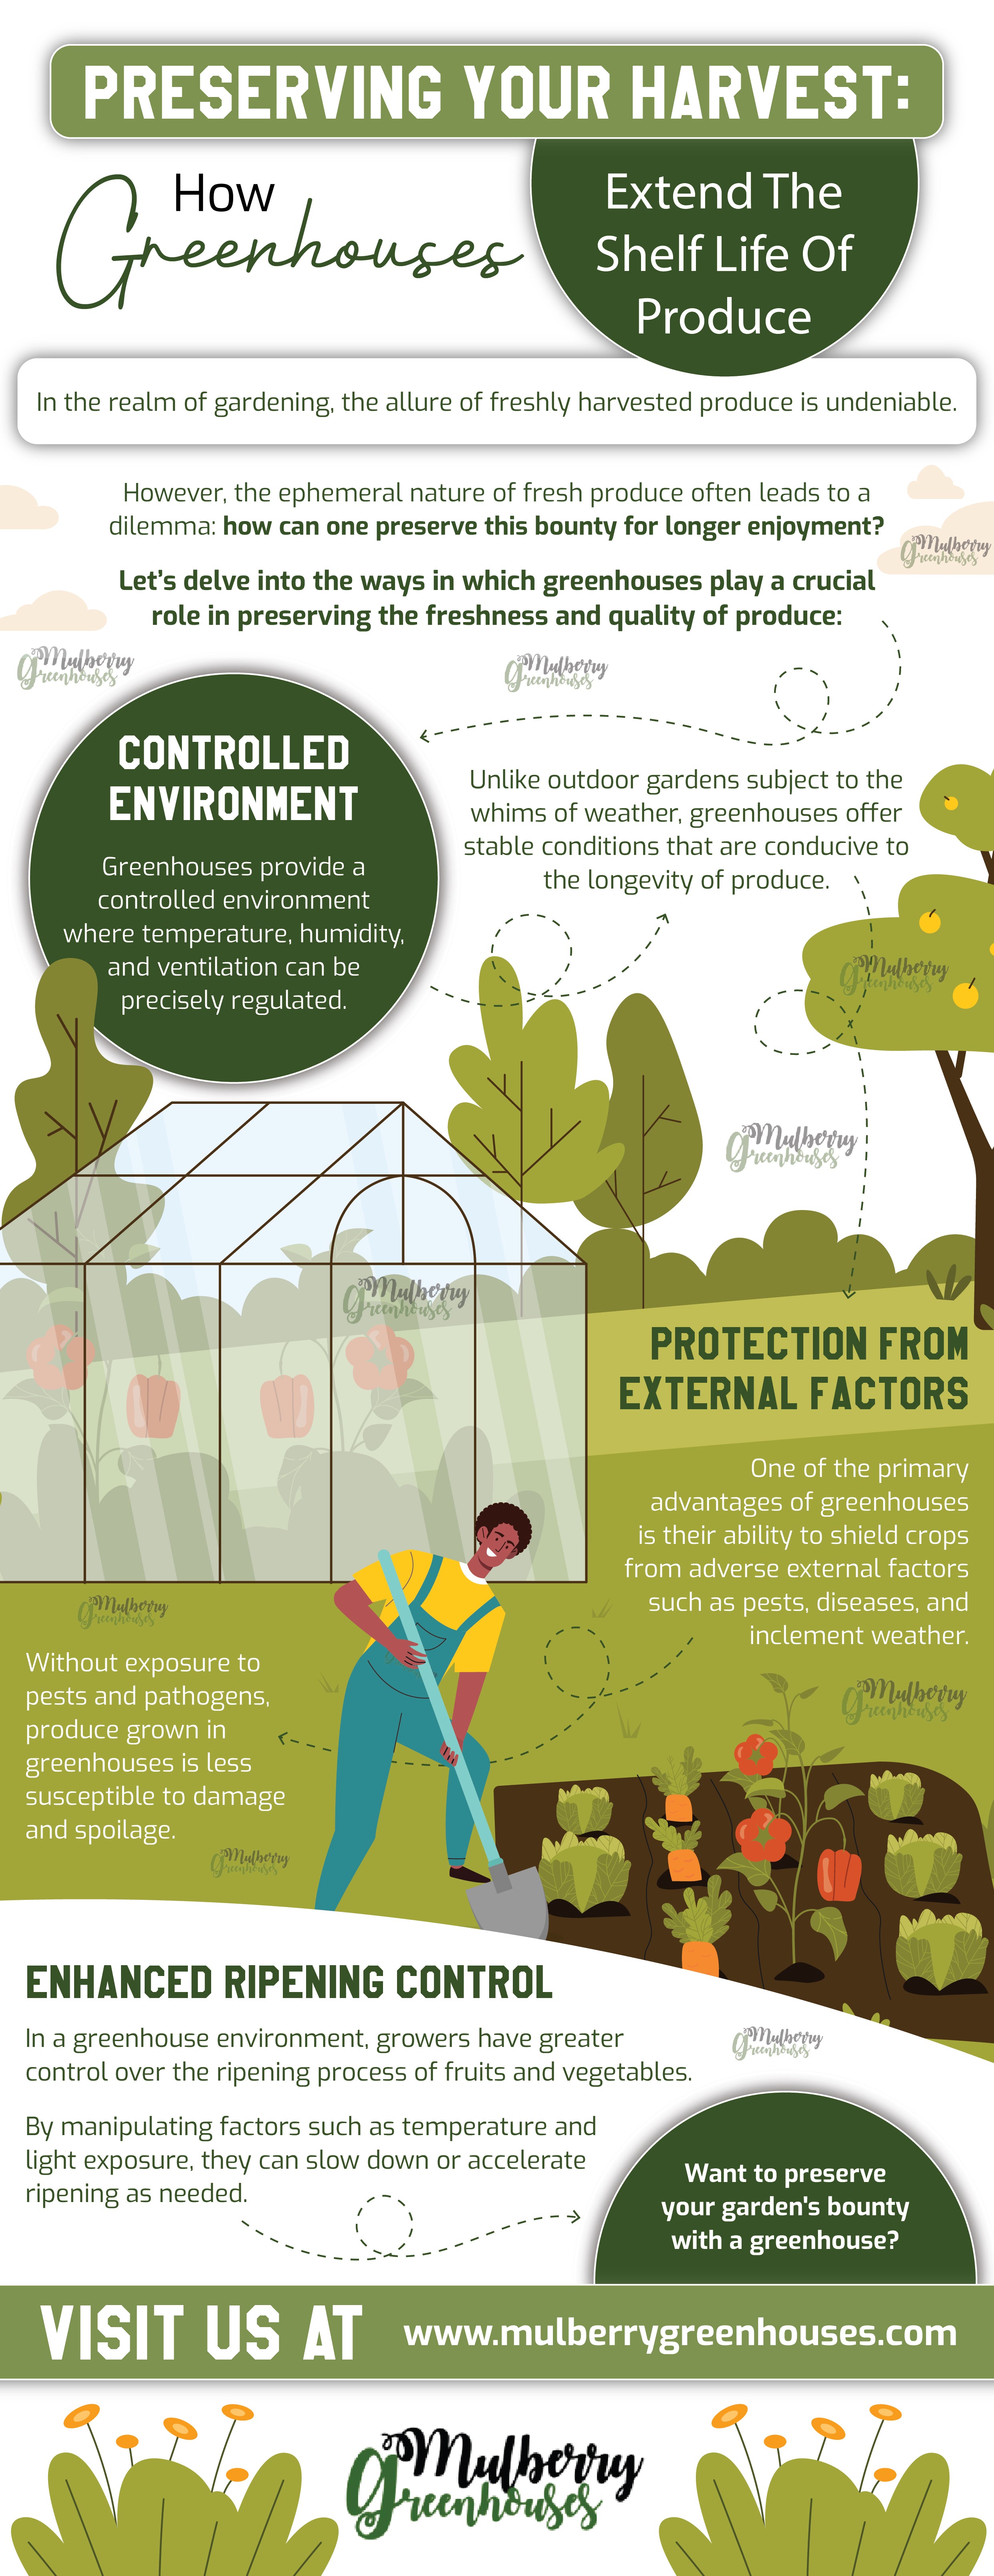 Preserving Your Harvest: How Greenhouses Extend The Shelf Life Of Produce - Infograph